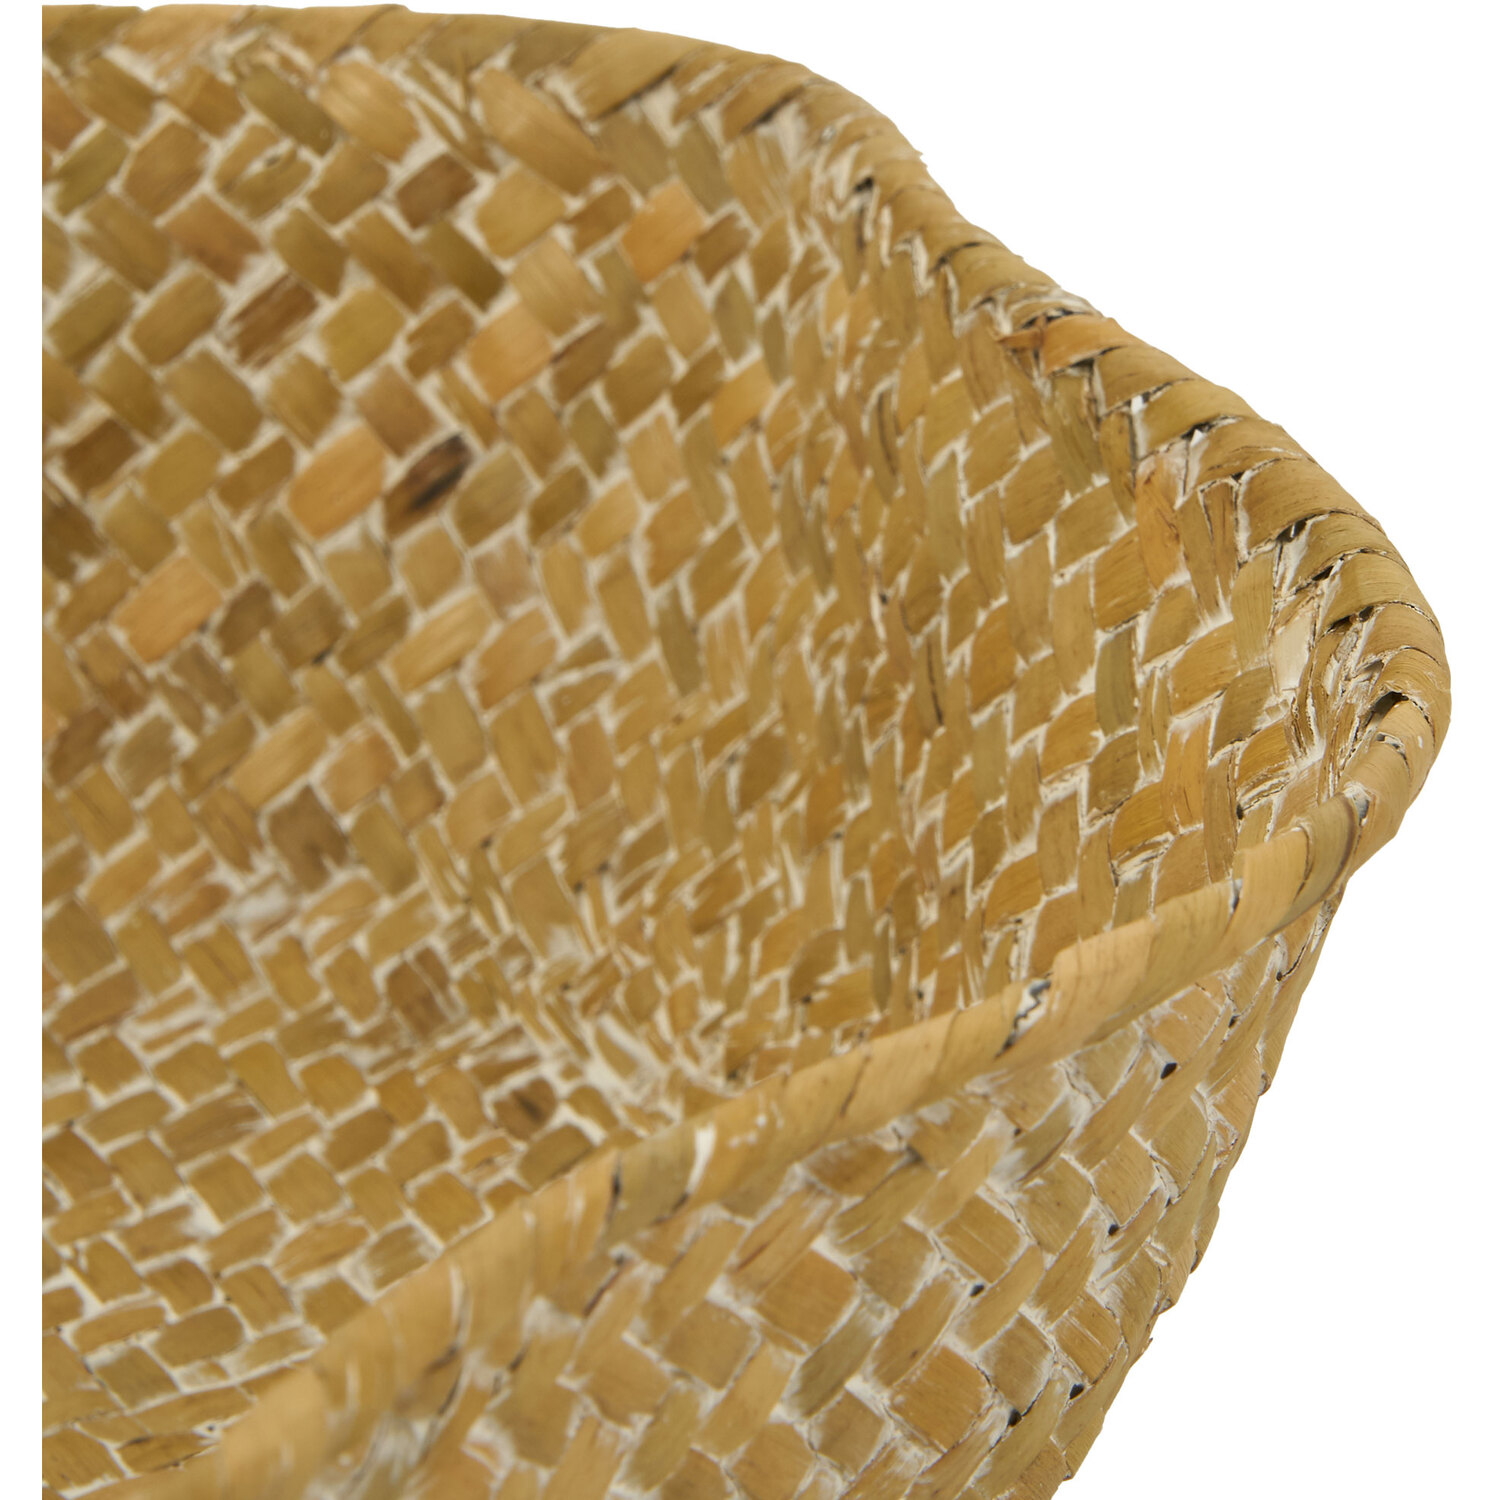 Nell Brown Seagrass Basket Image 2